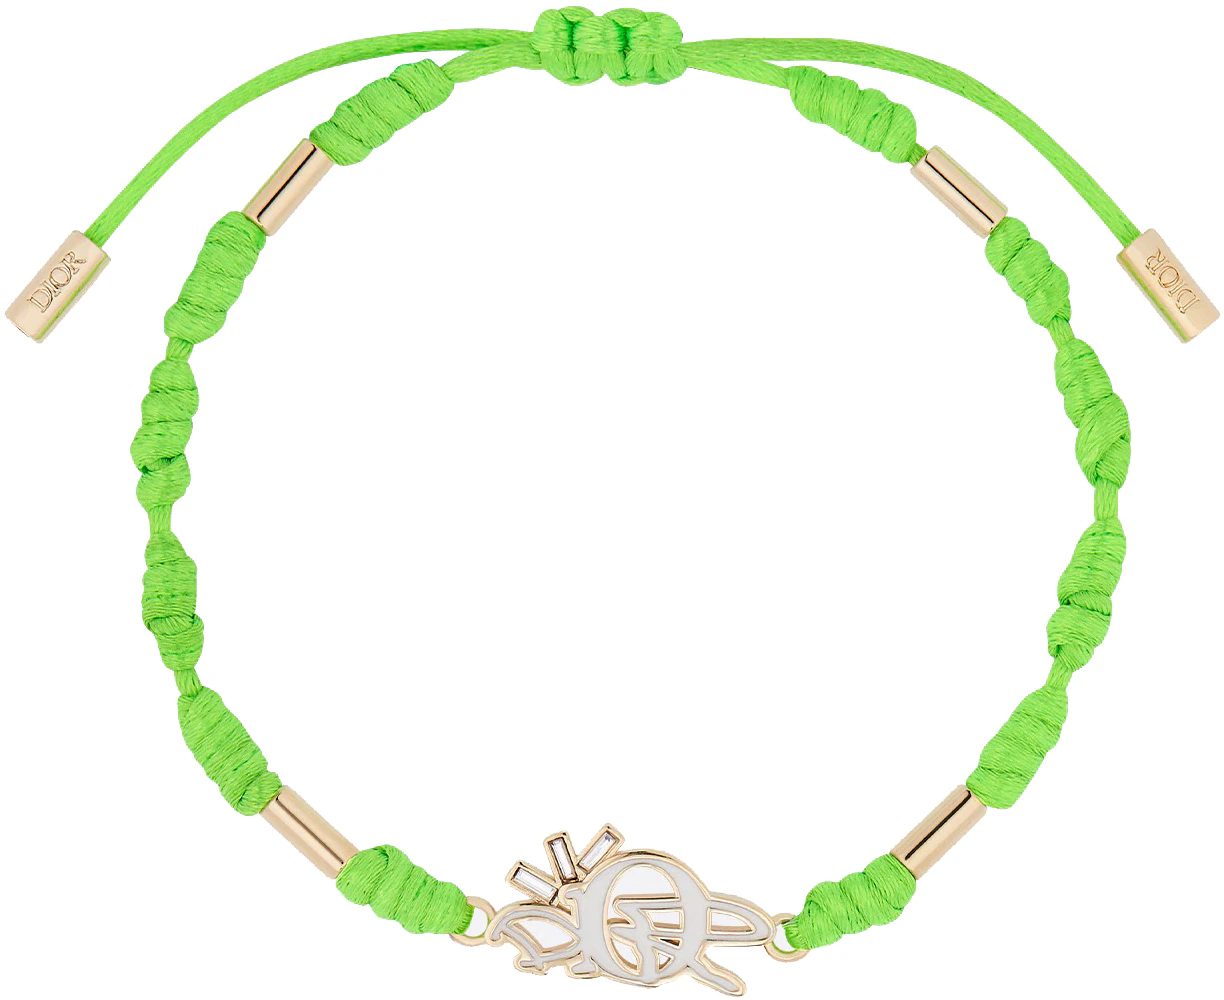 Dior x CACTUS JACK Bracelet Gold/Green/White in Cotton/Resin with Gold ...